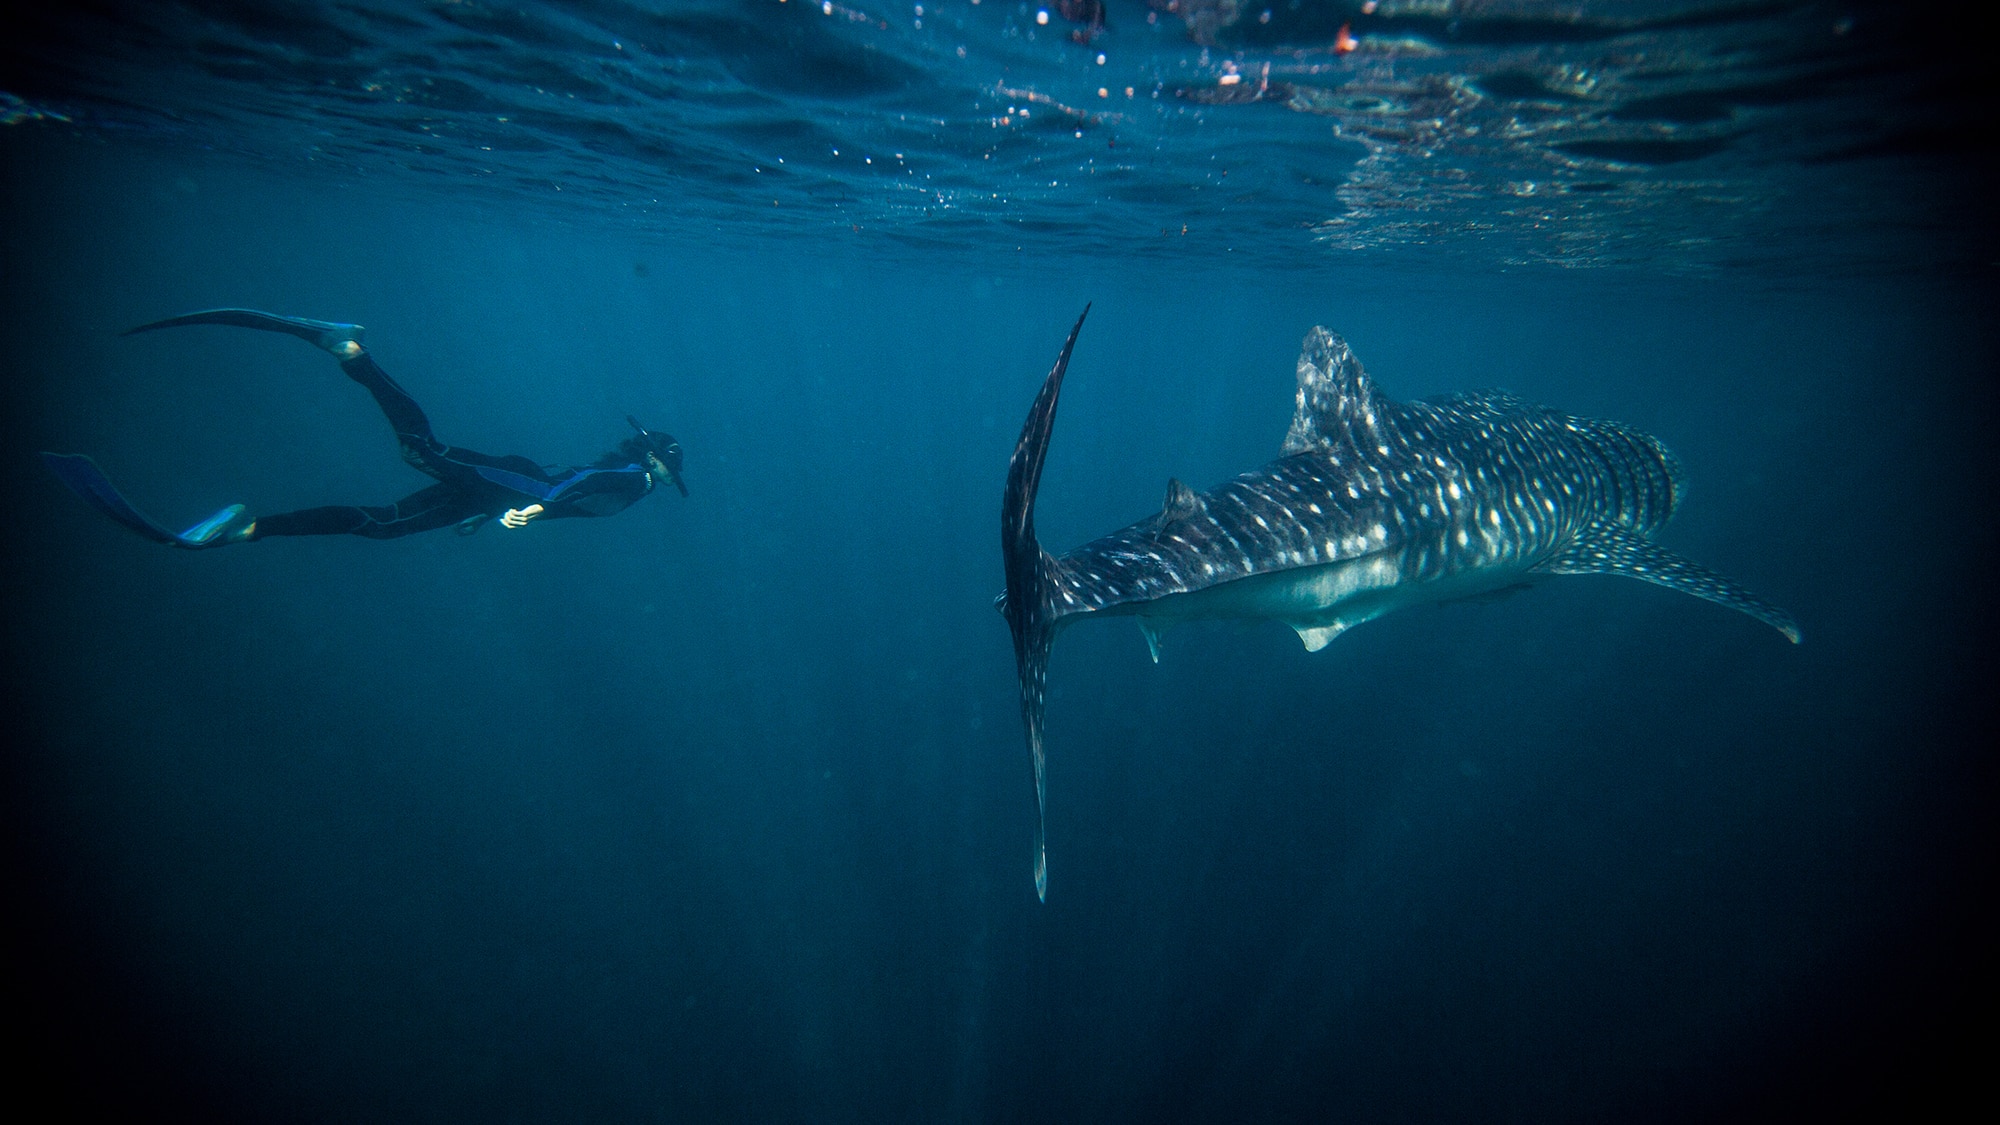 Swimming with whale sharks in Djibouti, photography by Beatrice Colombo Serri